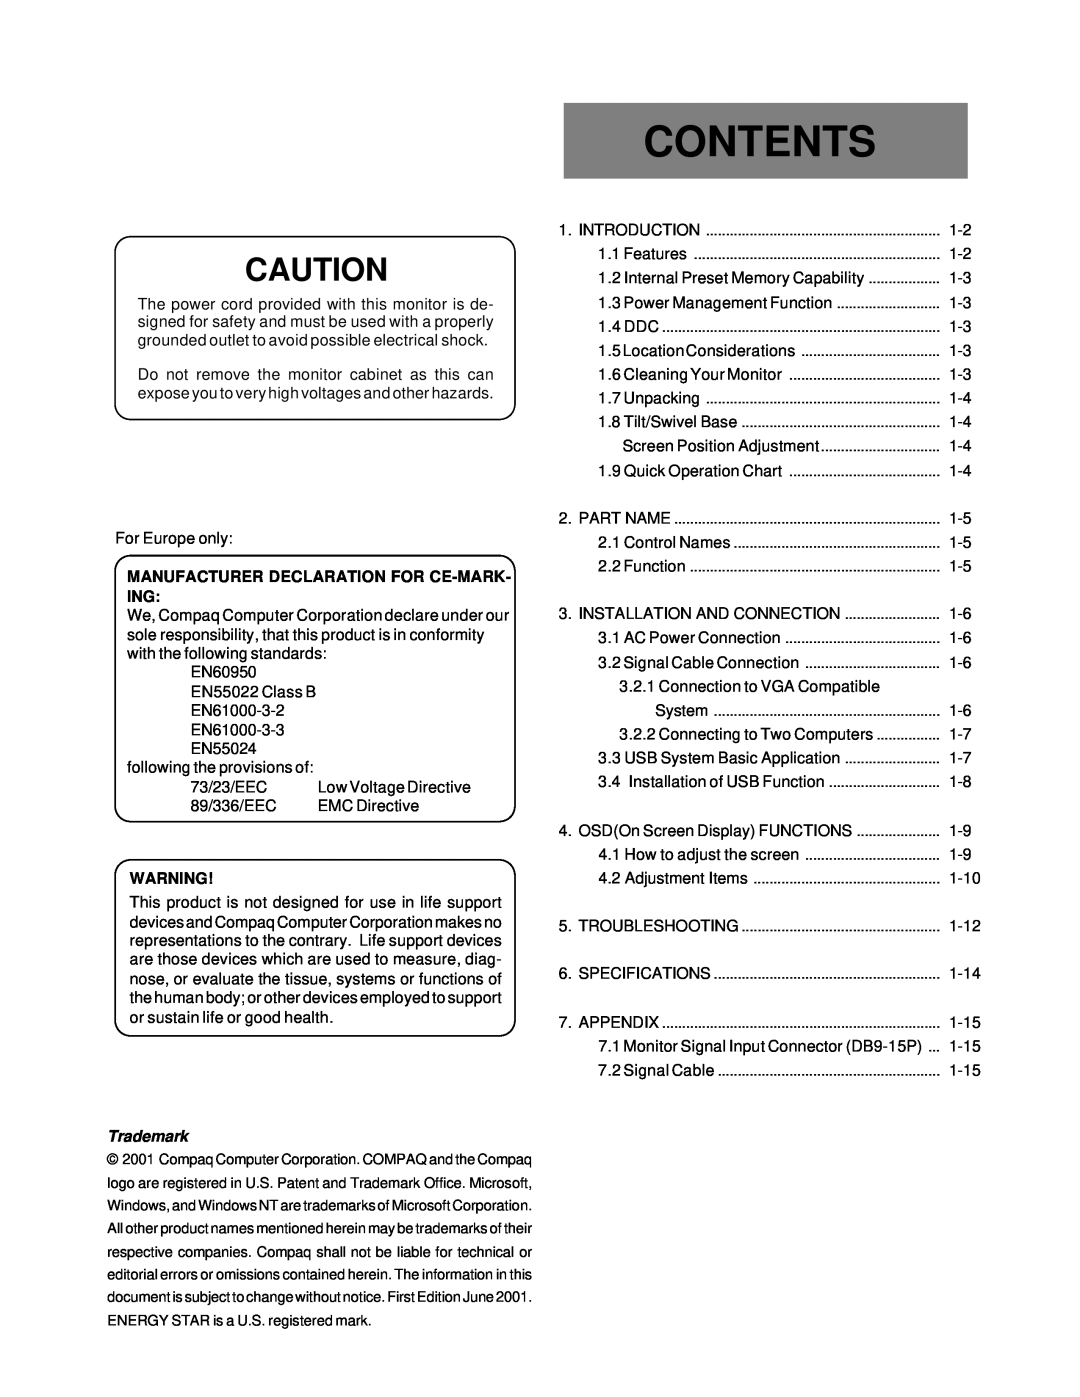 Compaq 1220 manual Contents, Manufacturer Declaration For Ce-Mark- Ing, Trademark 